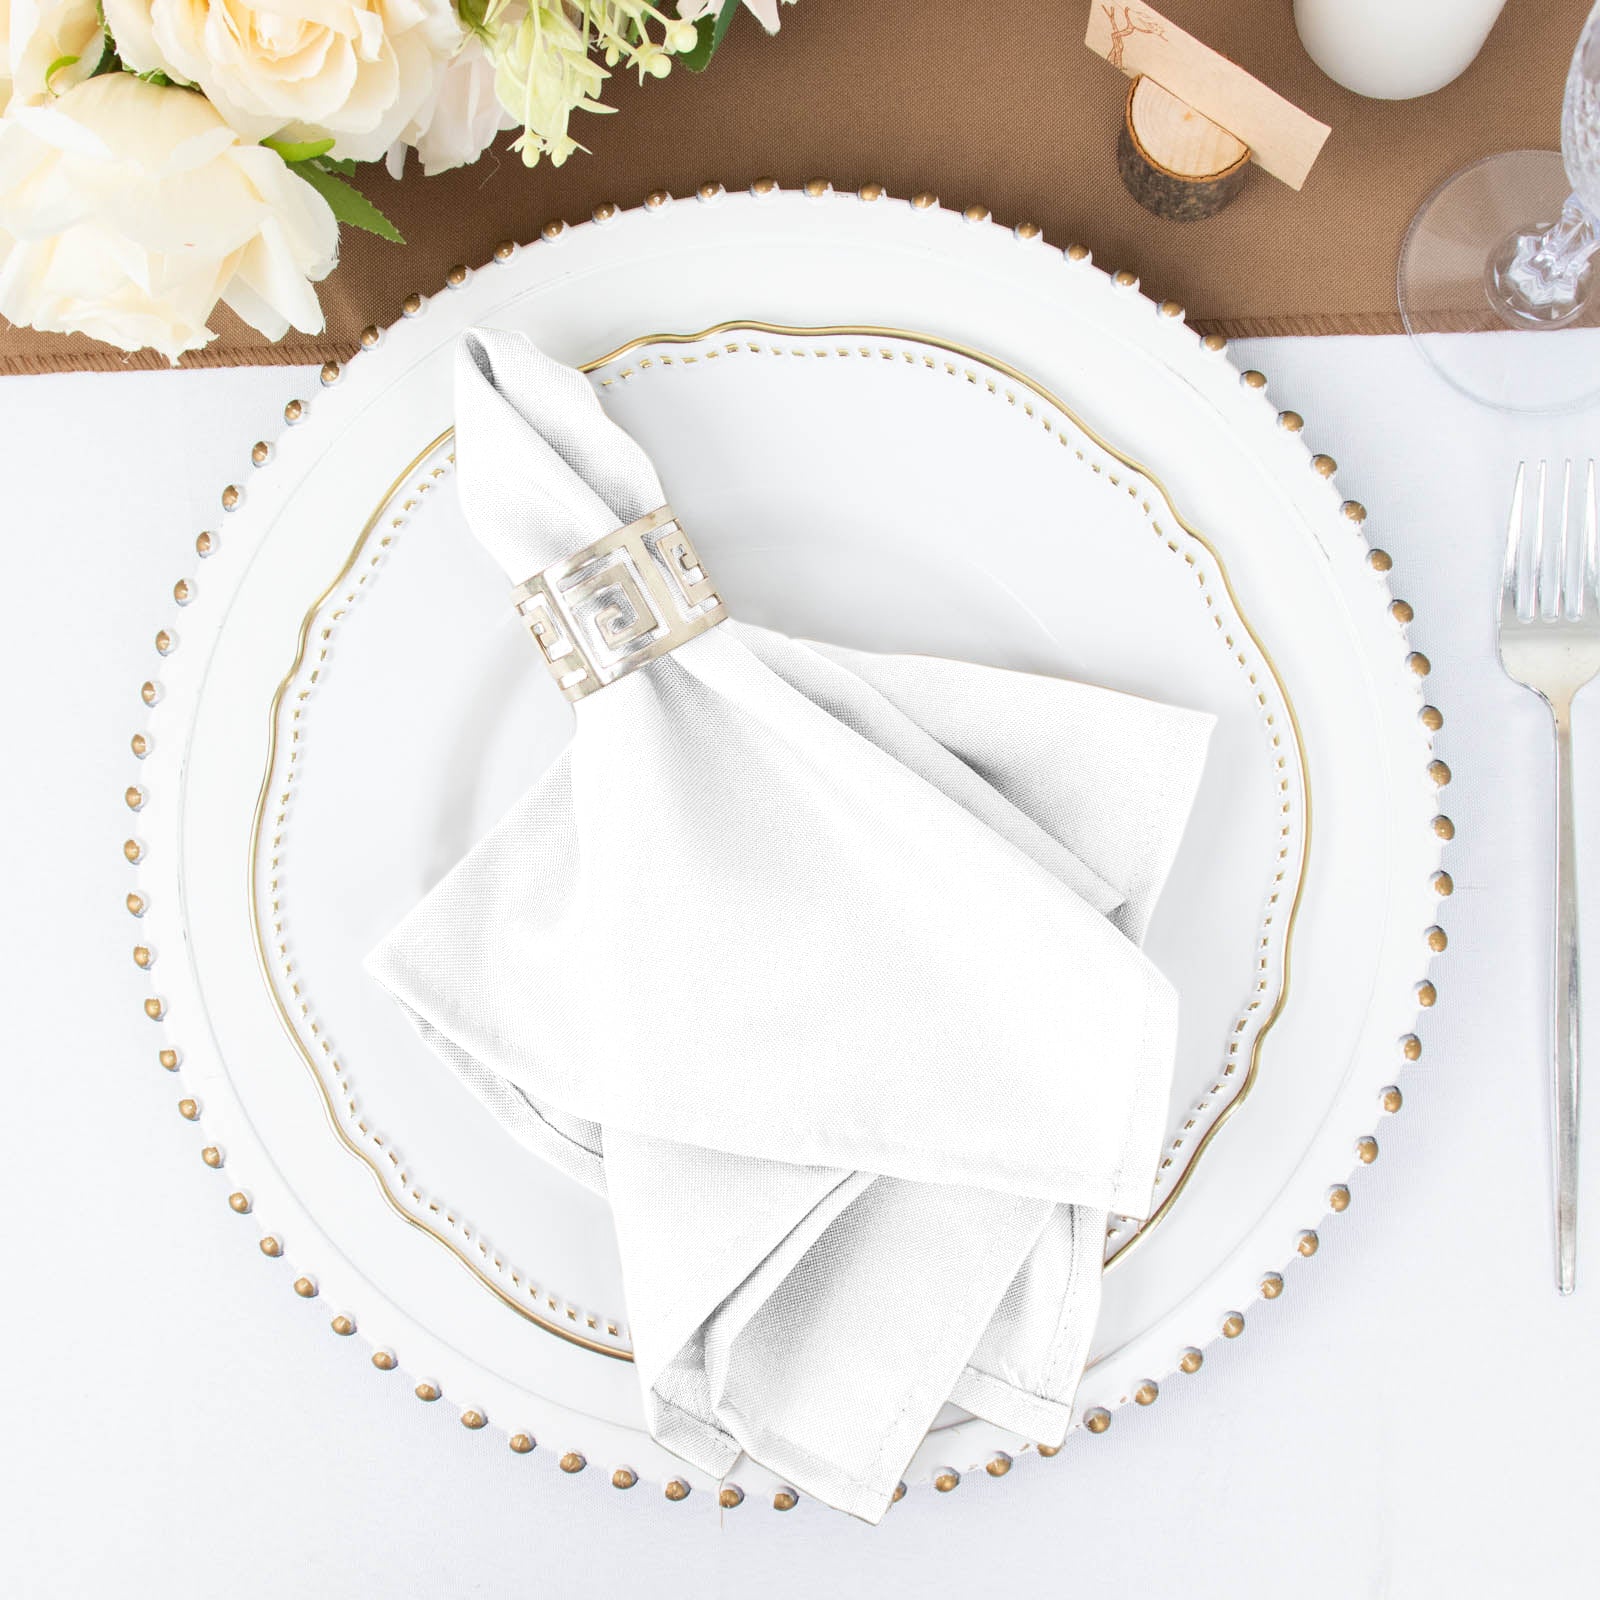 Leading Linens 150 pcs 17x17 inch Polyester Cloth Napkin - White -  Wedding Linen Restaurant Dinner Wedding Banquet Party - 19 Colors Available